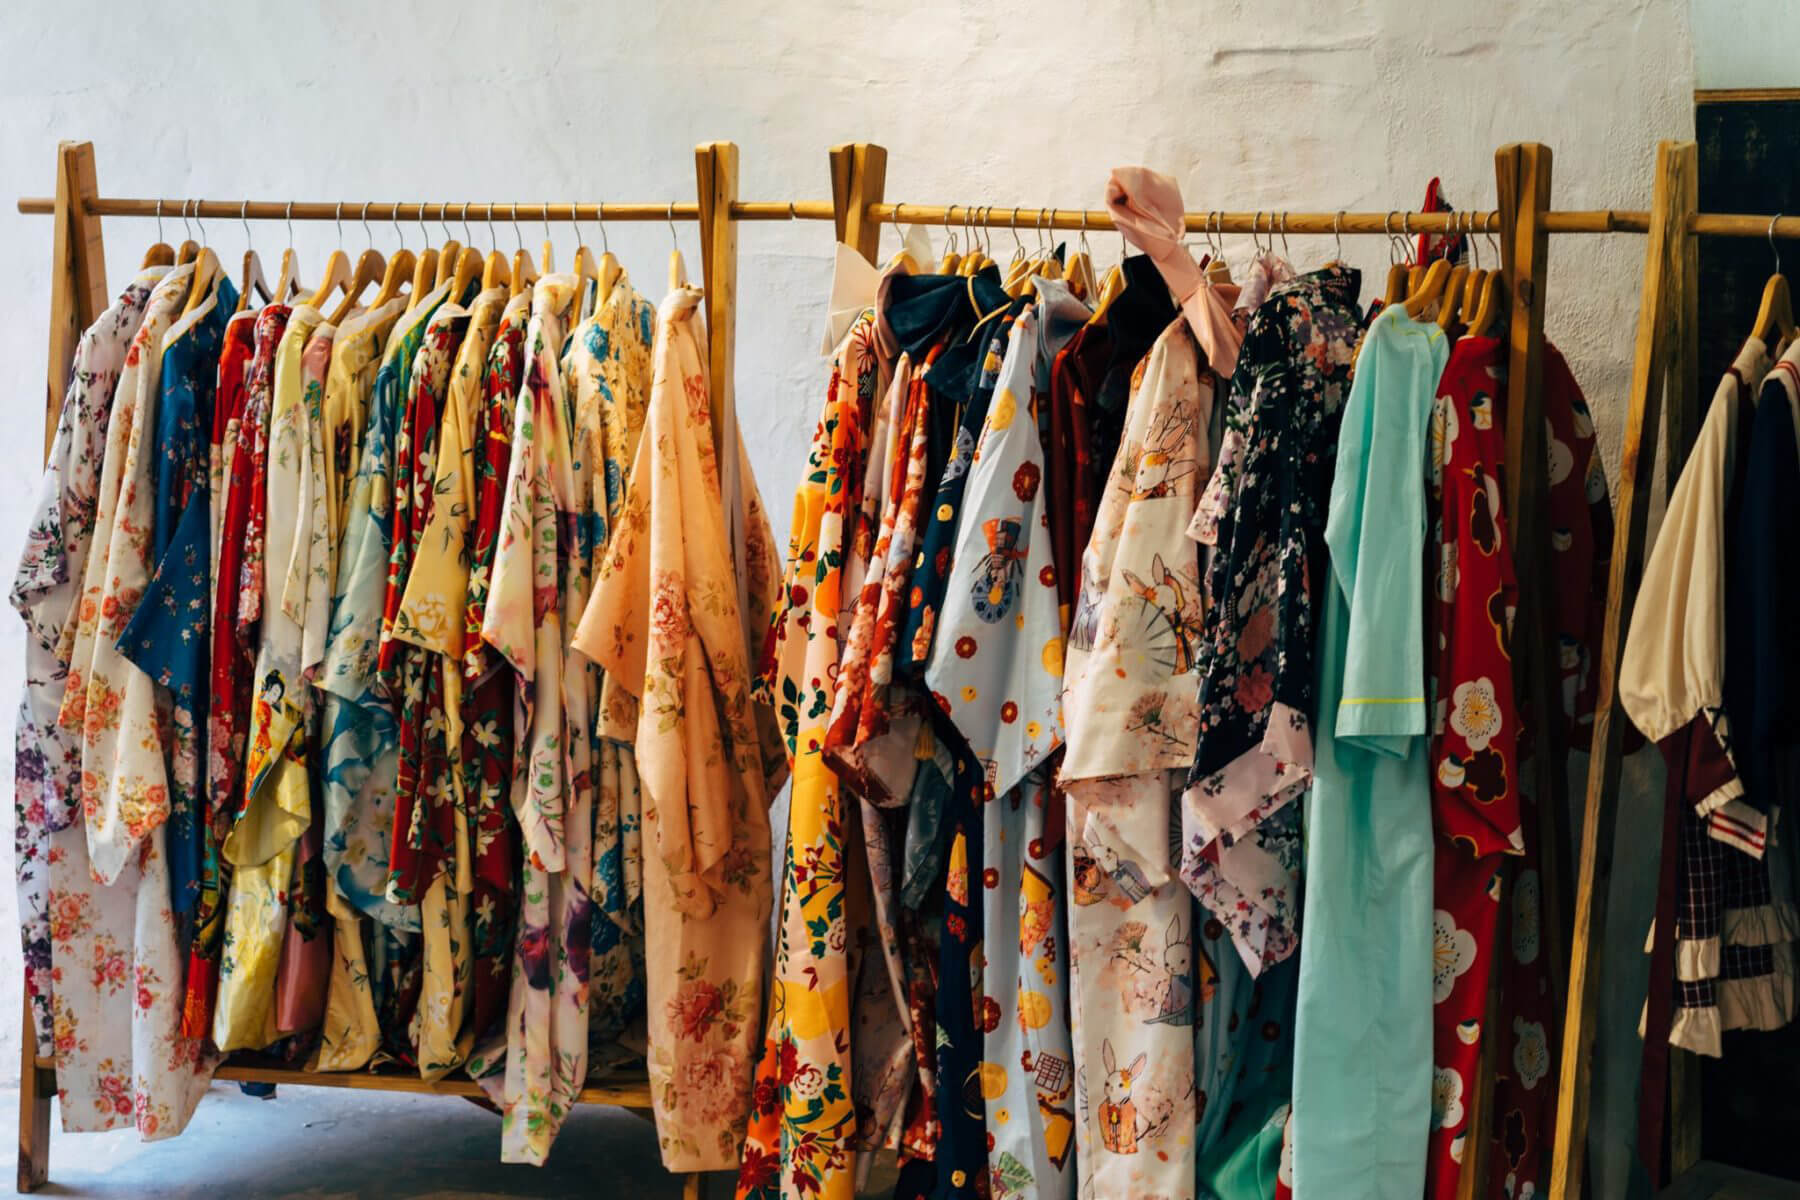 Bulk Listing of Clothes in a Hanger